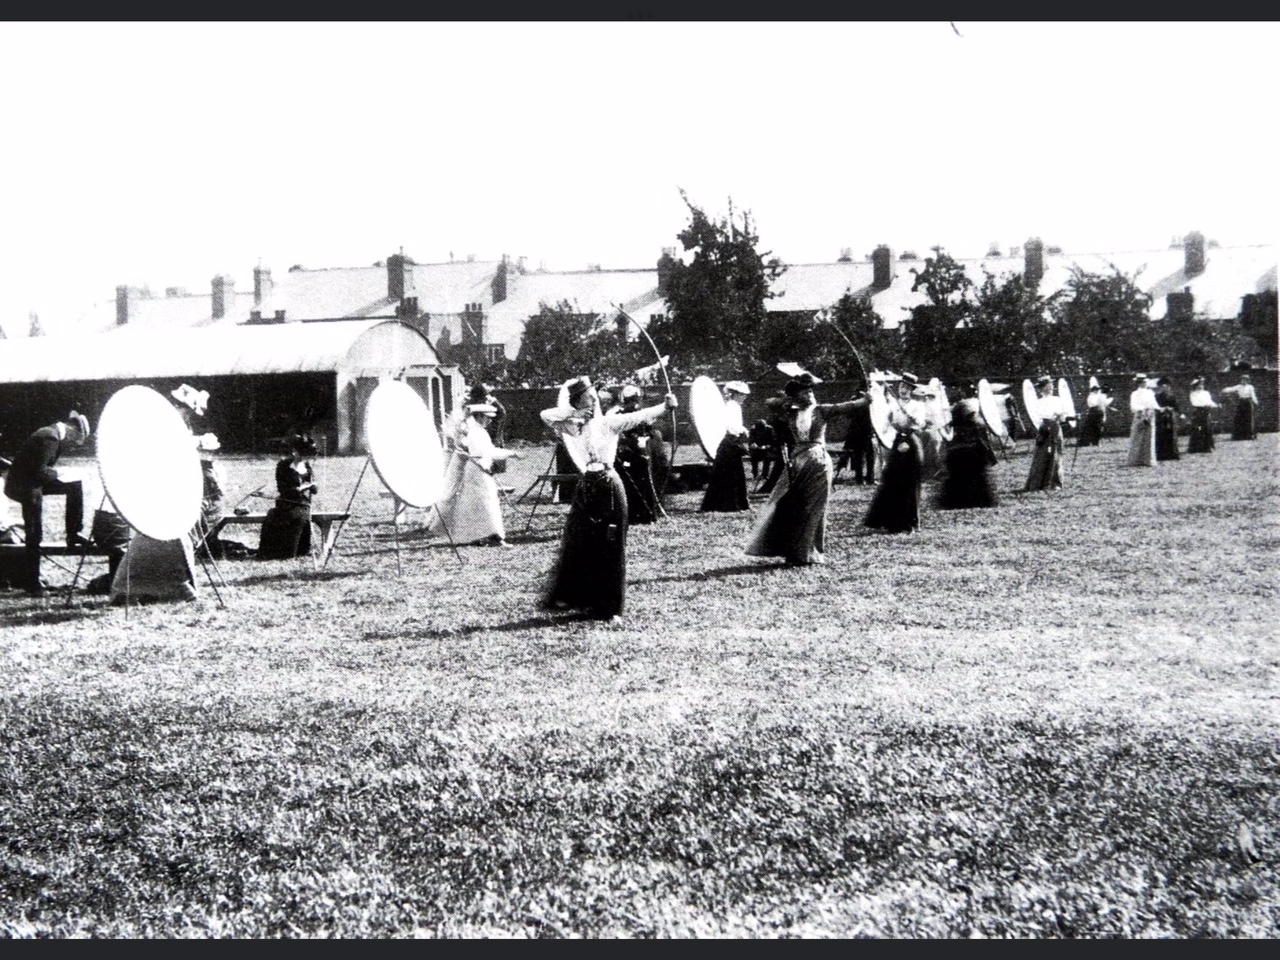 Ladies practising their archery at Suvla Barracks - note the sentry boxes against the shed.